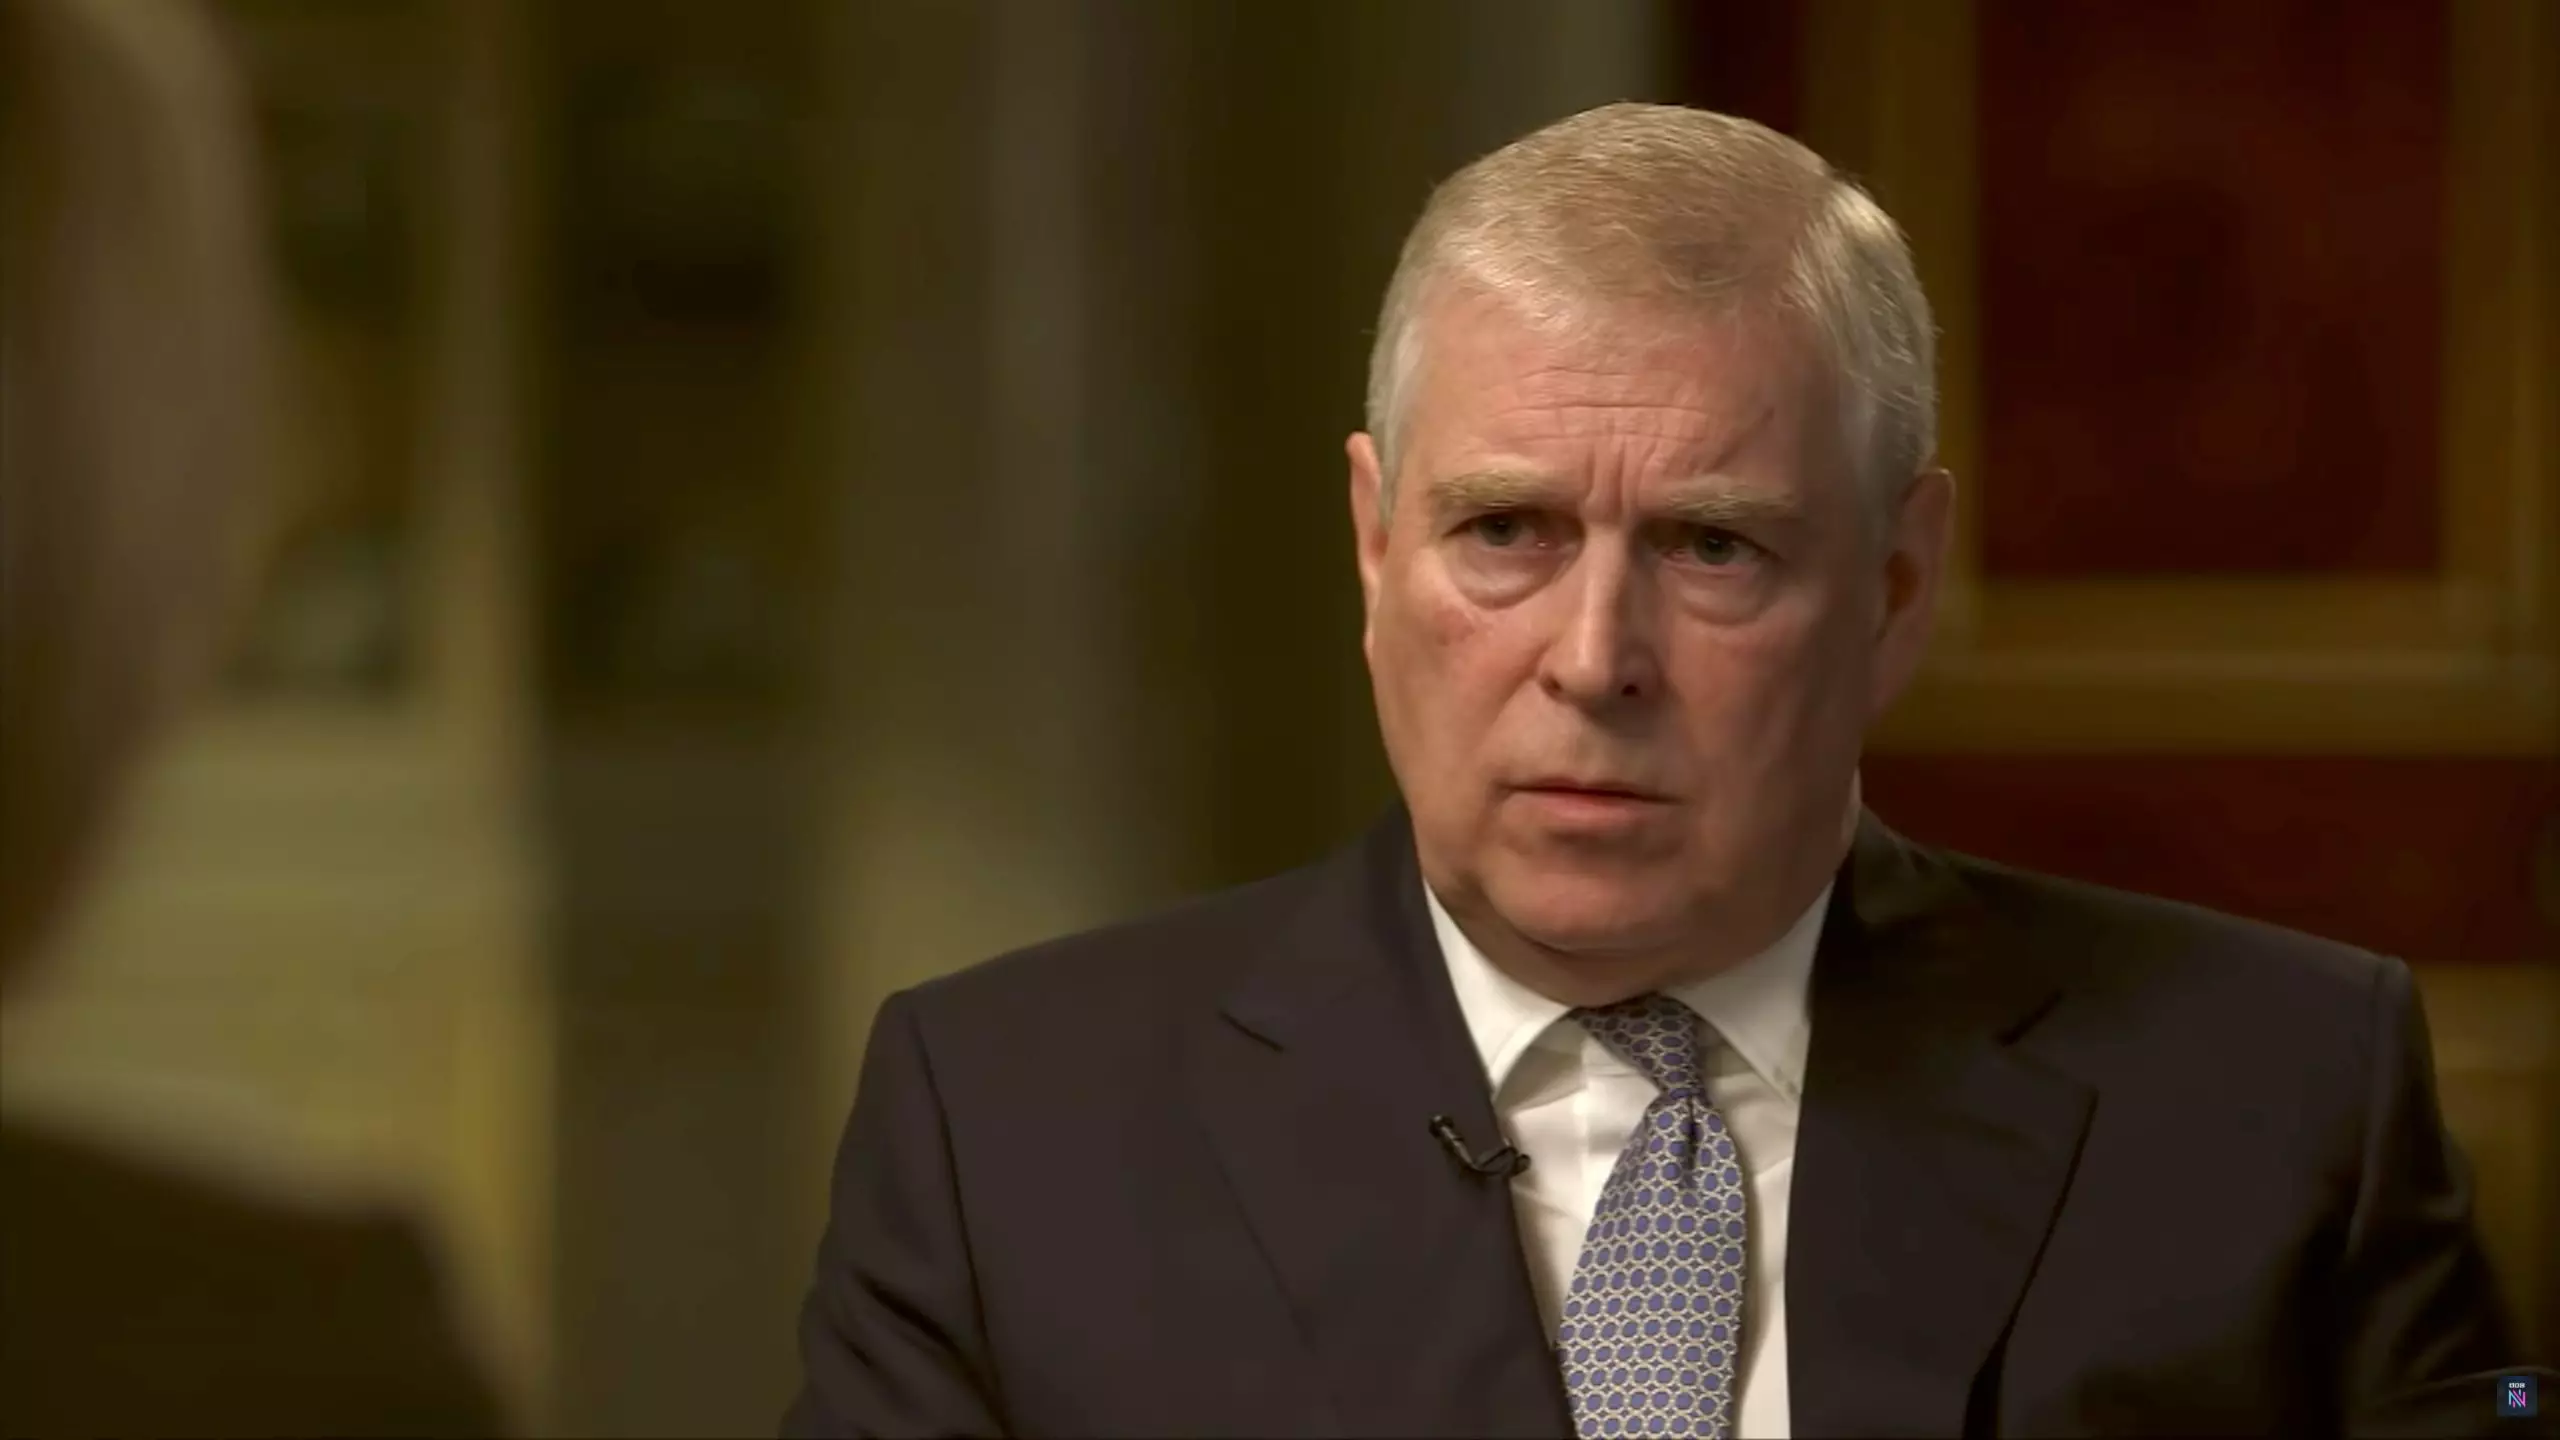 Prince Andrew sat down with Emily Maitlis for BBC's Newsnight last autumn (